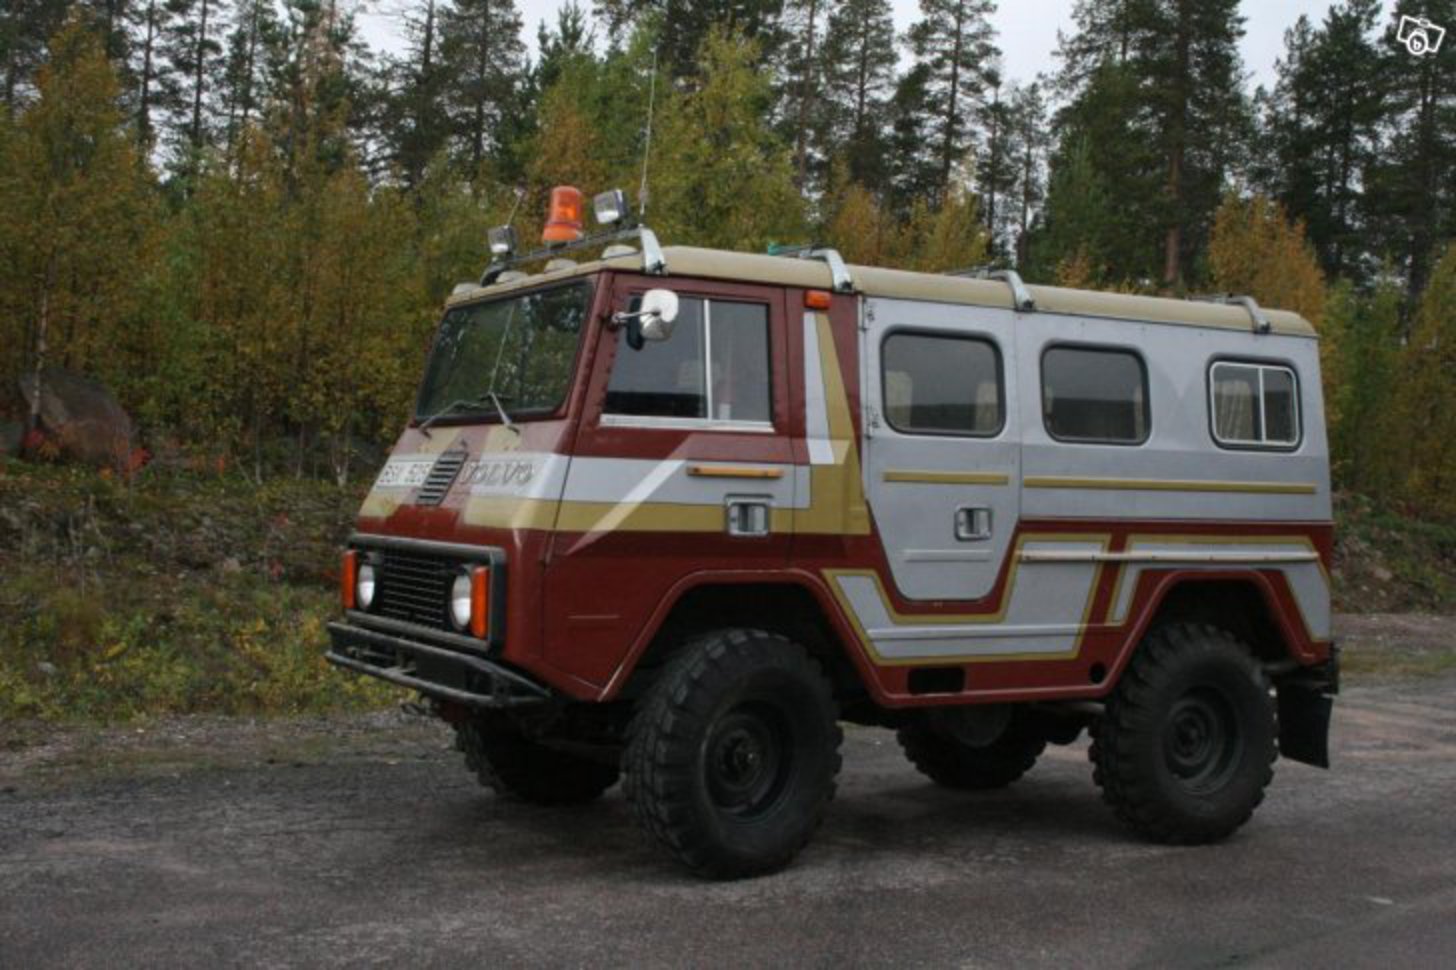 head on over to blocket.se and check out this 1981 Volvo C202 4x4 being